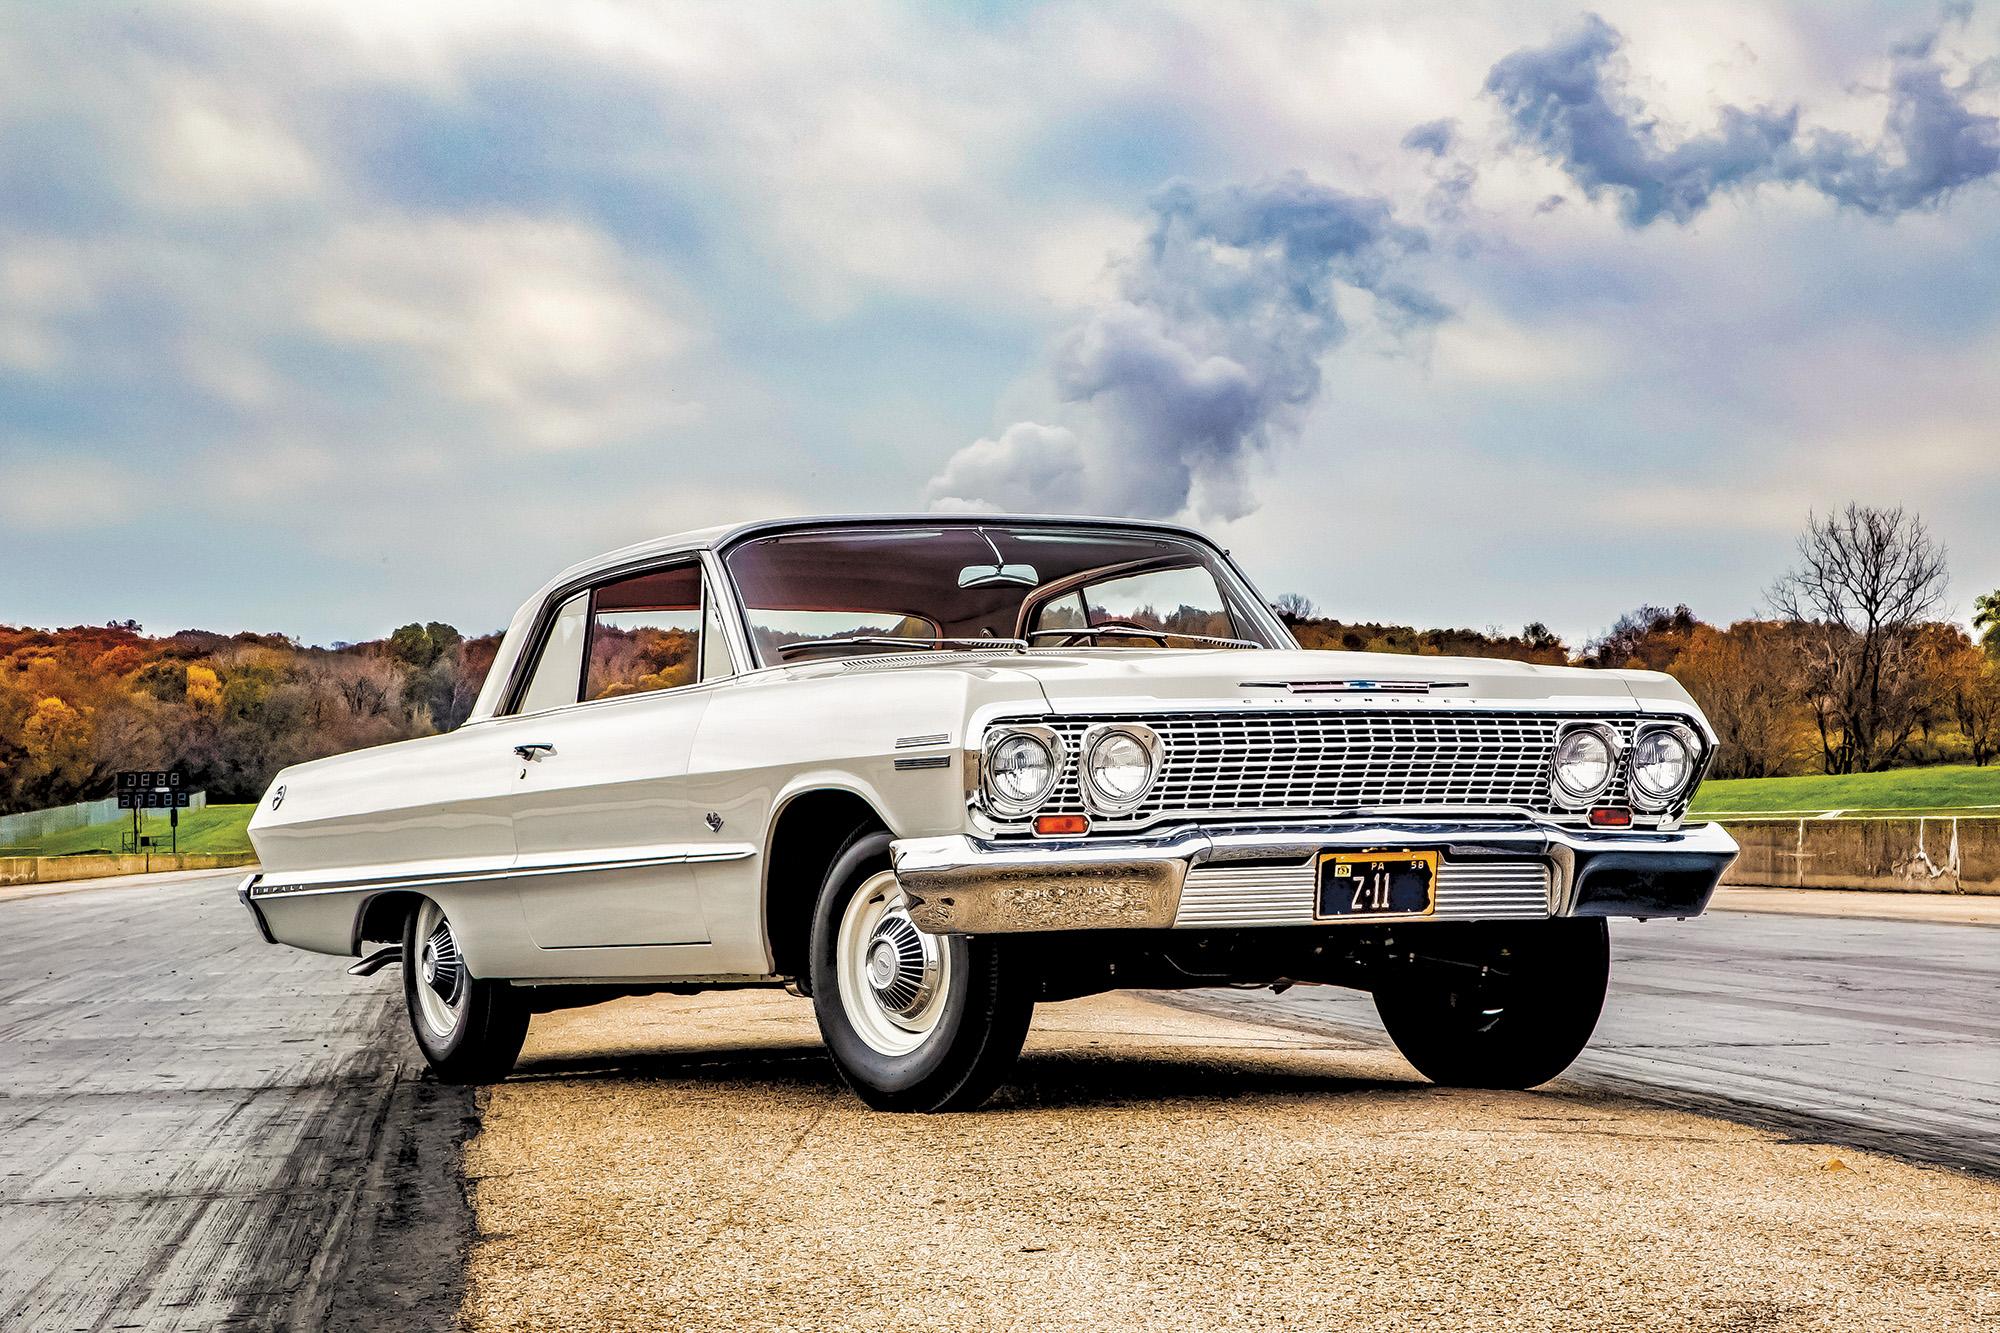 This 1963 Chevrolet Impala Z11 is a Rare Bird and a Drag Strip Showoff